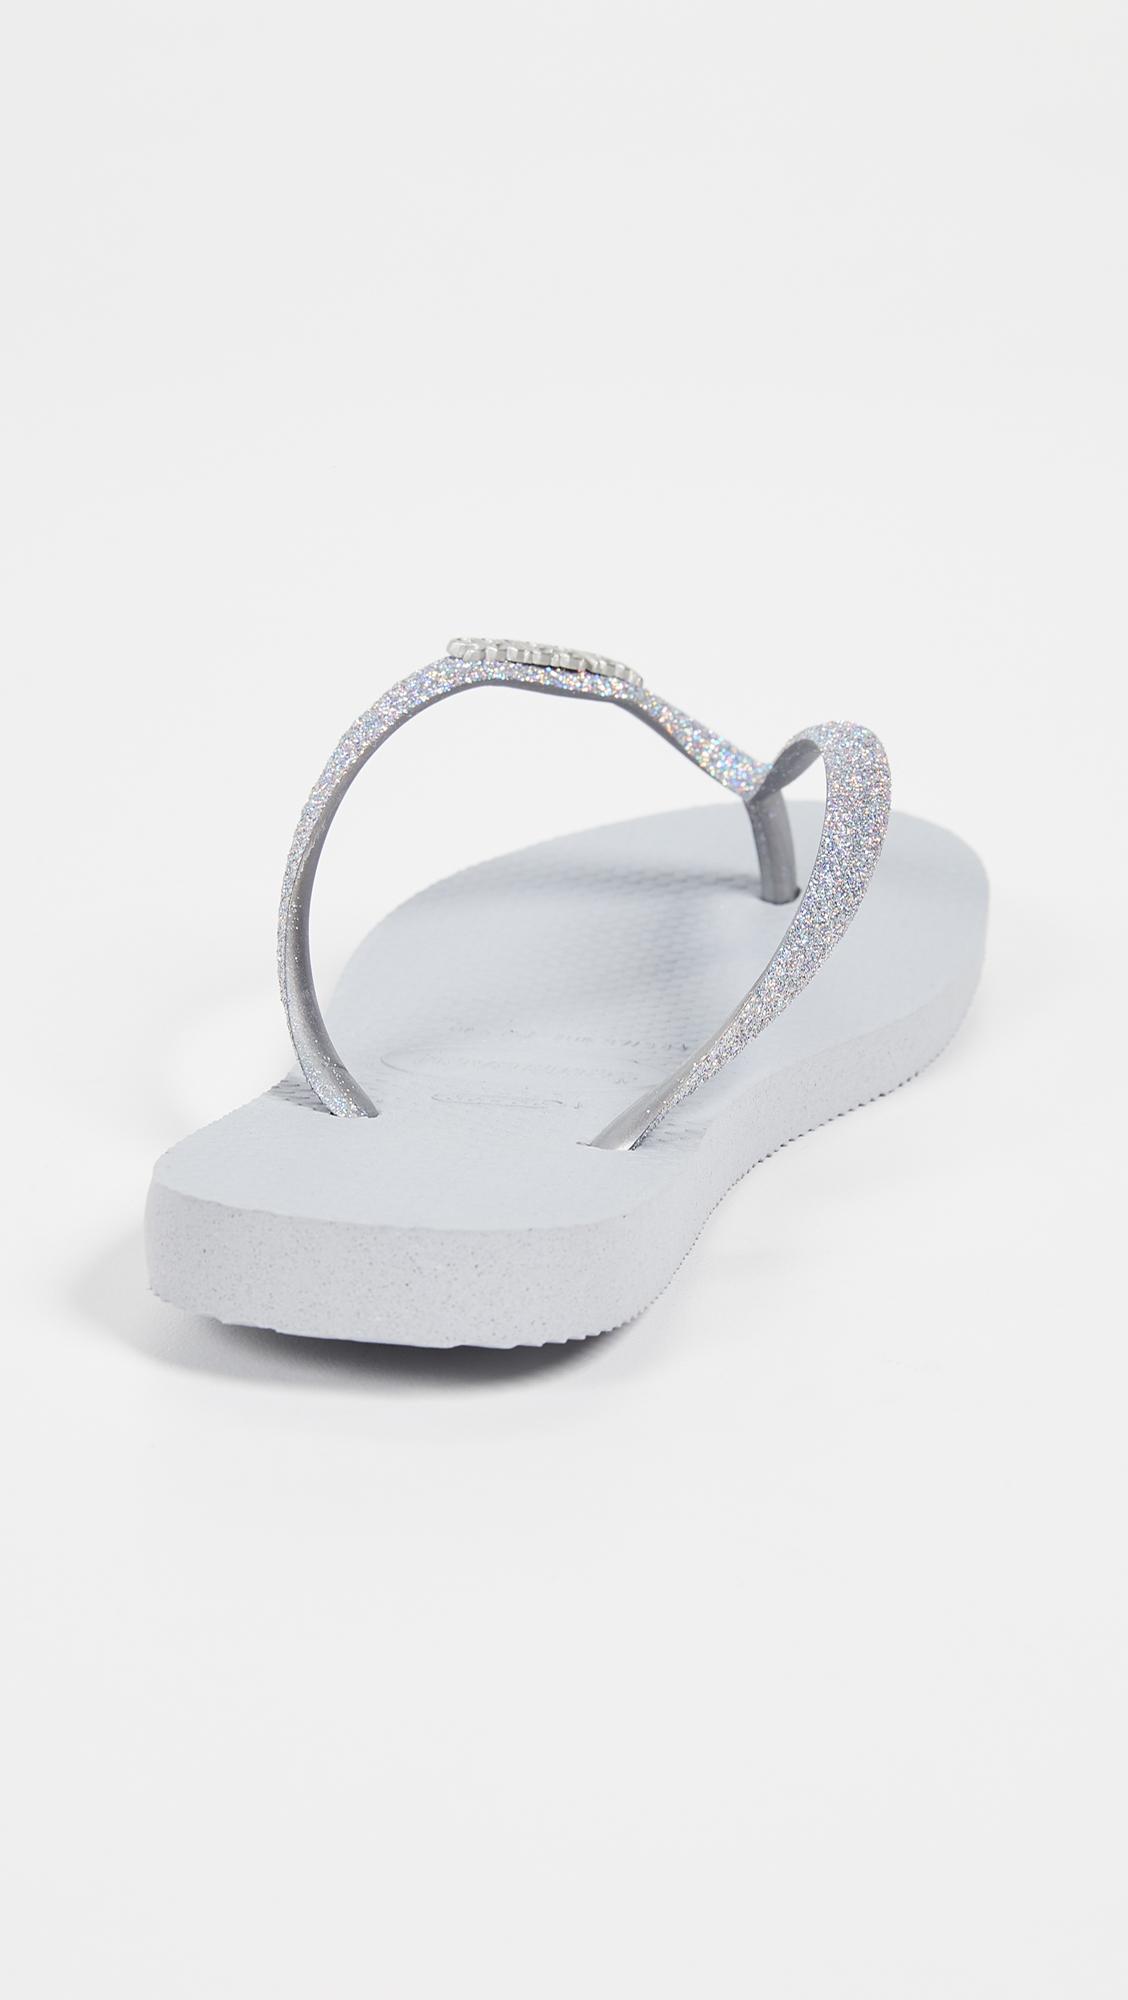 Save 31% Womens Shoes Flats and flat shoes Sandals and flip-flops Havaianas Hav Slim Glitter Grey Flip-flop in Metallic 